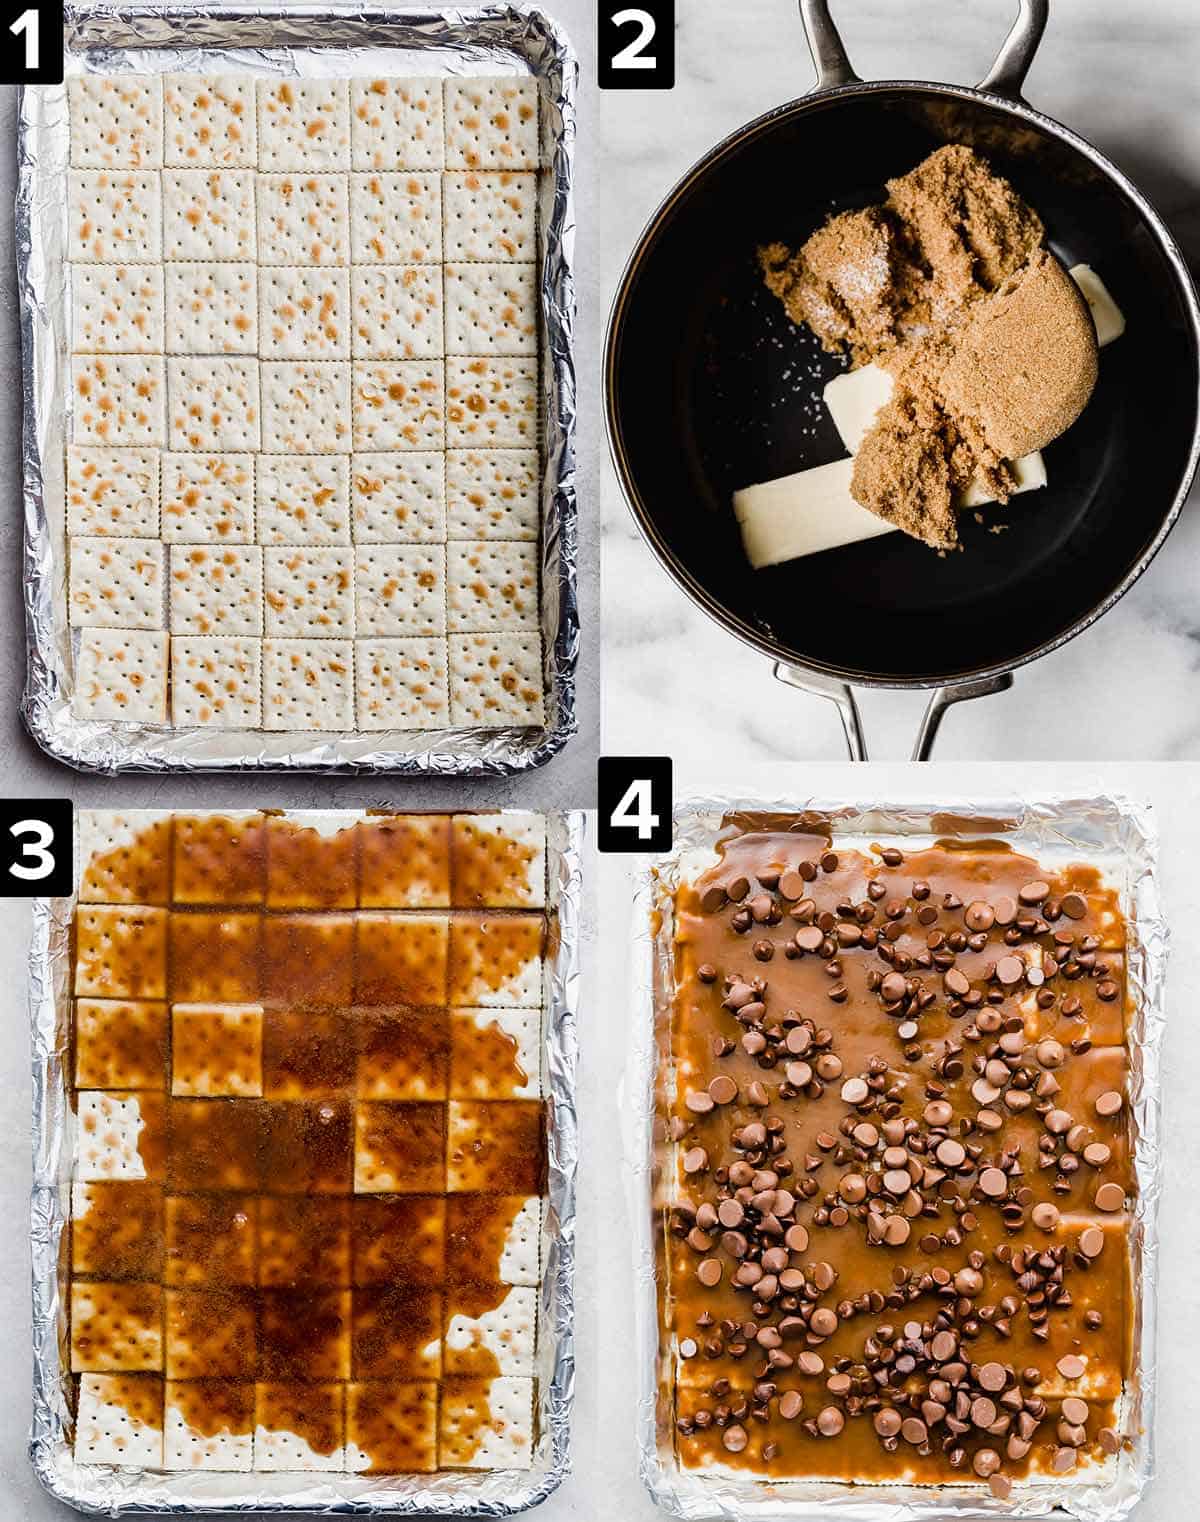 Four photos showing how to make saltine cracker toffee recipe: crackers lined along the bottom of a pan, sugar butter and salt in a saucepan, then the toffee over the crackers, and chocolate chips spread over the toffee.